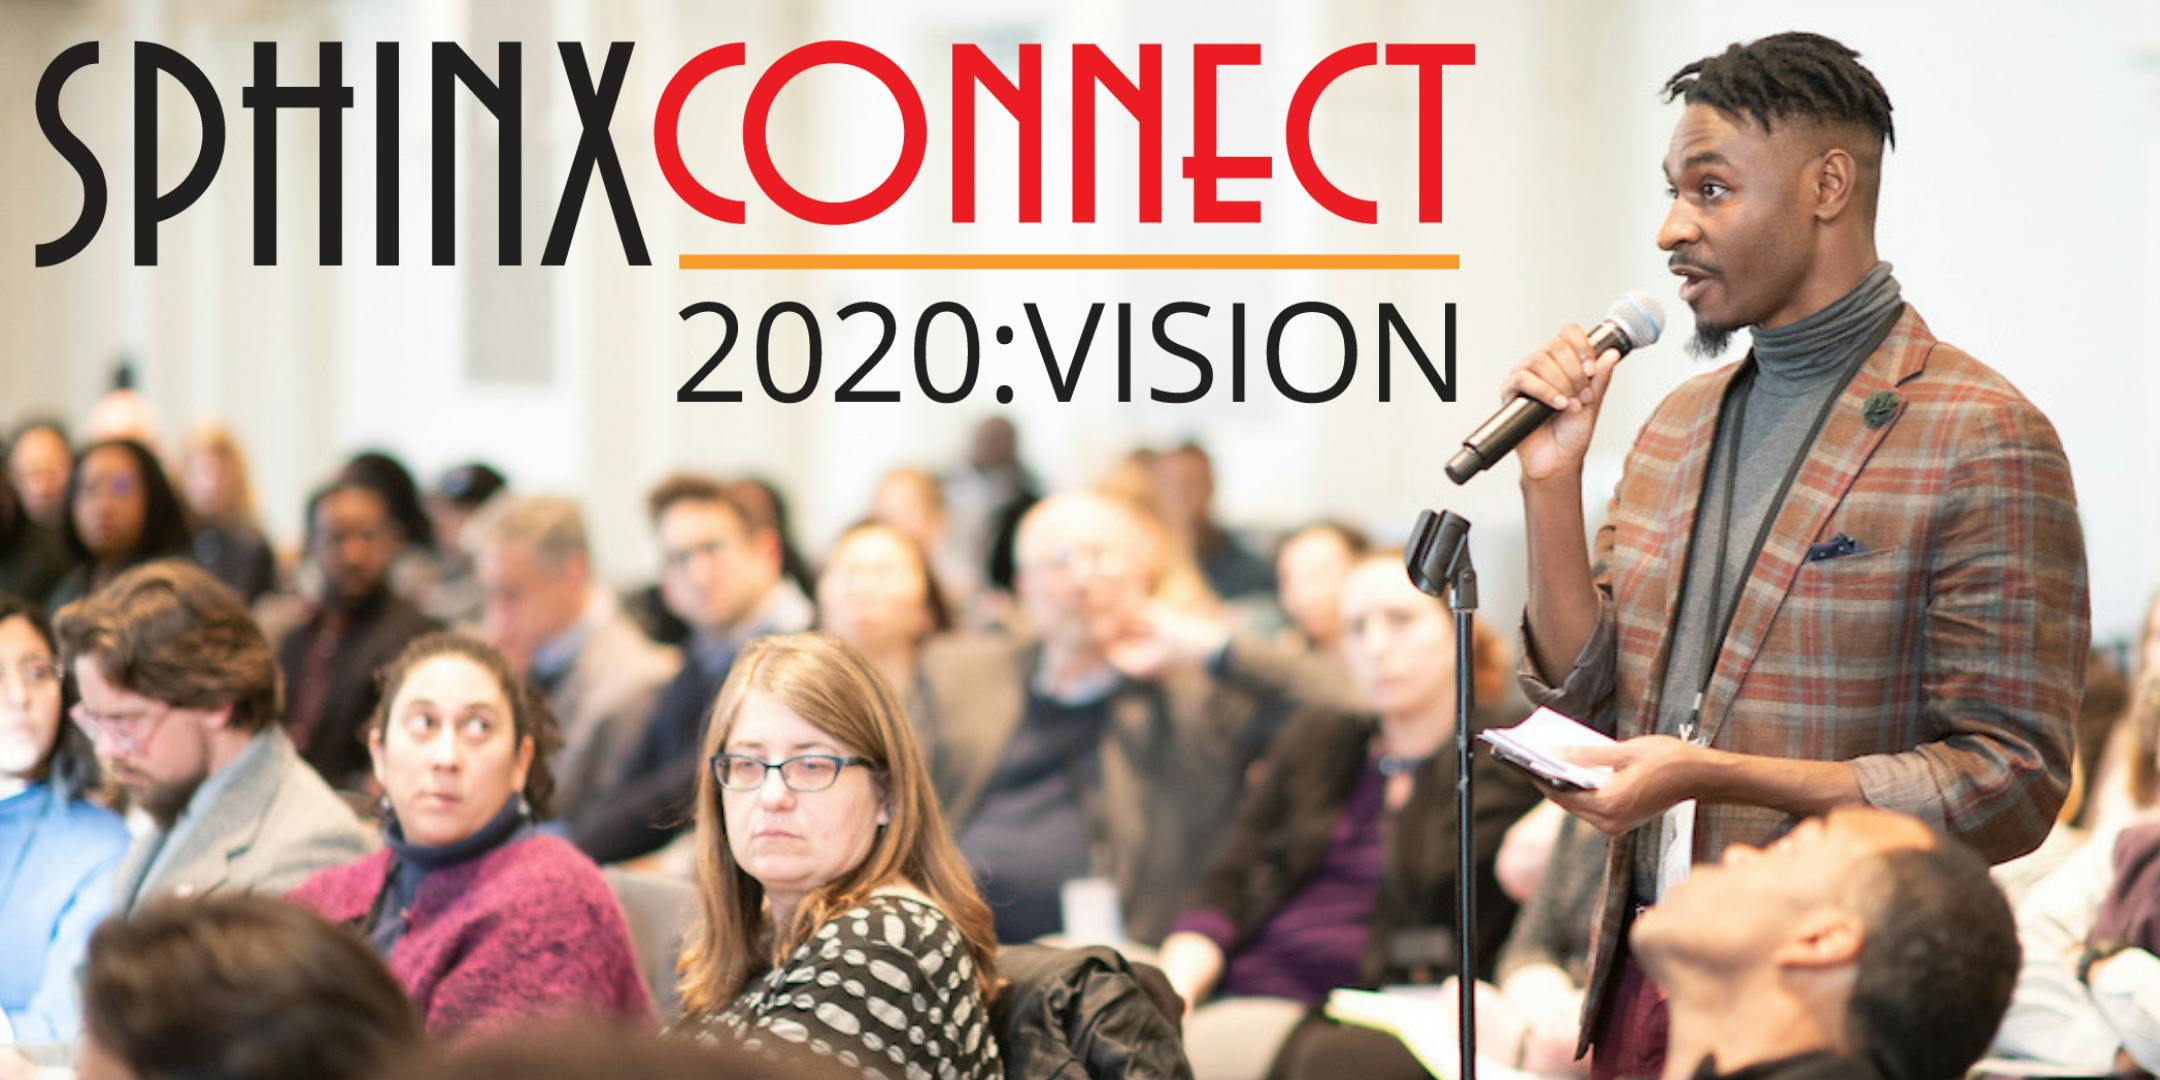 SphinxConnect 2020: Vision